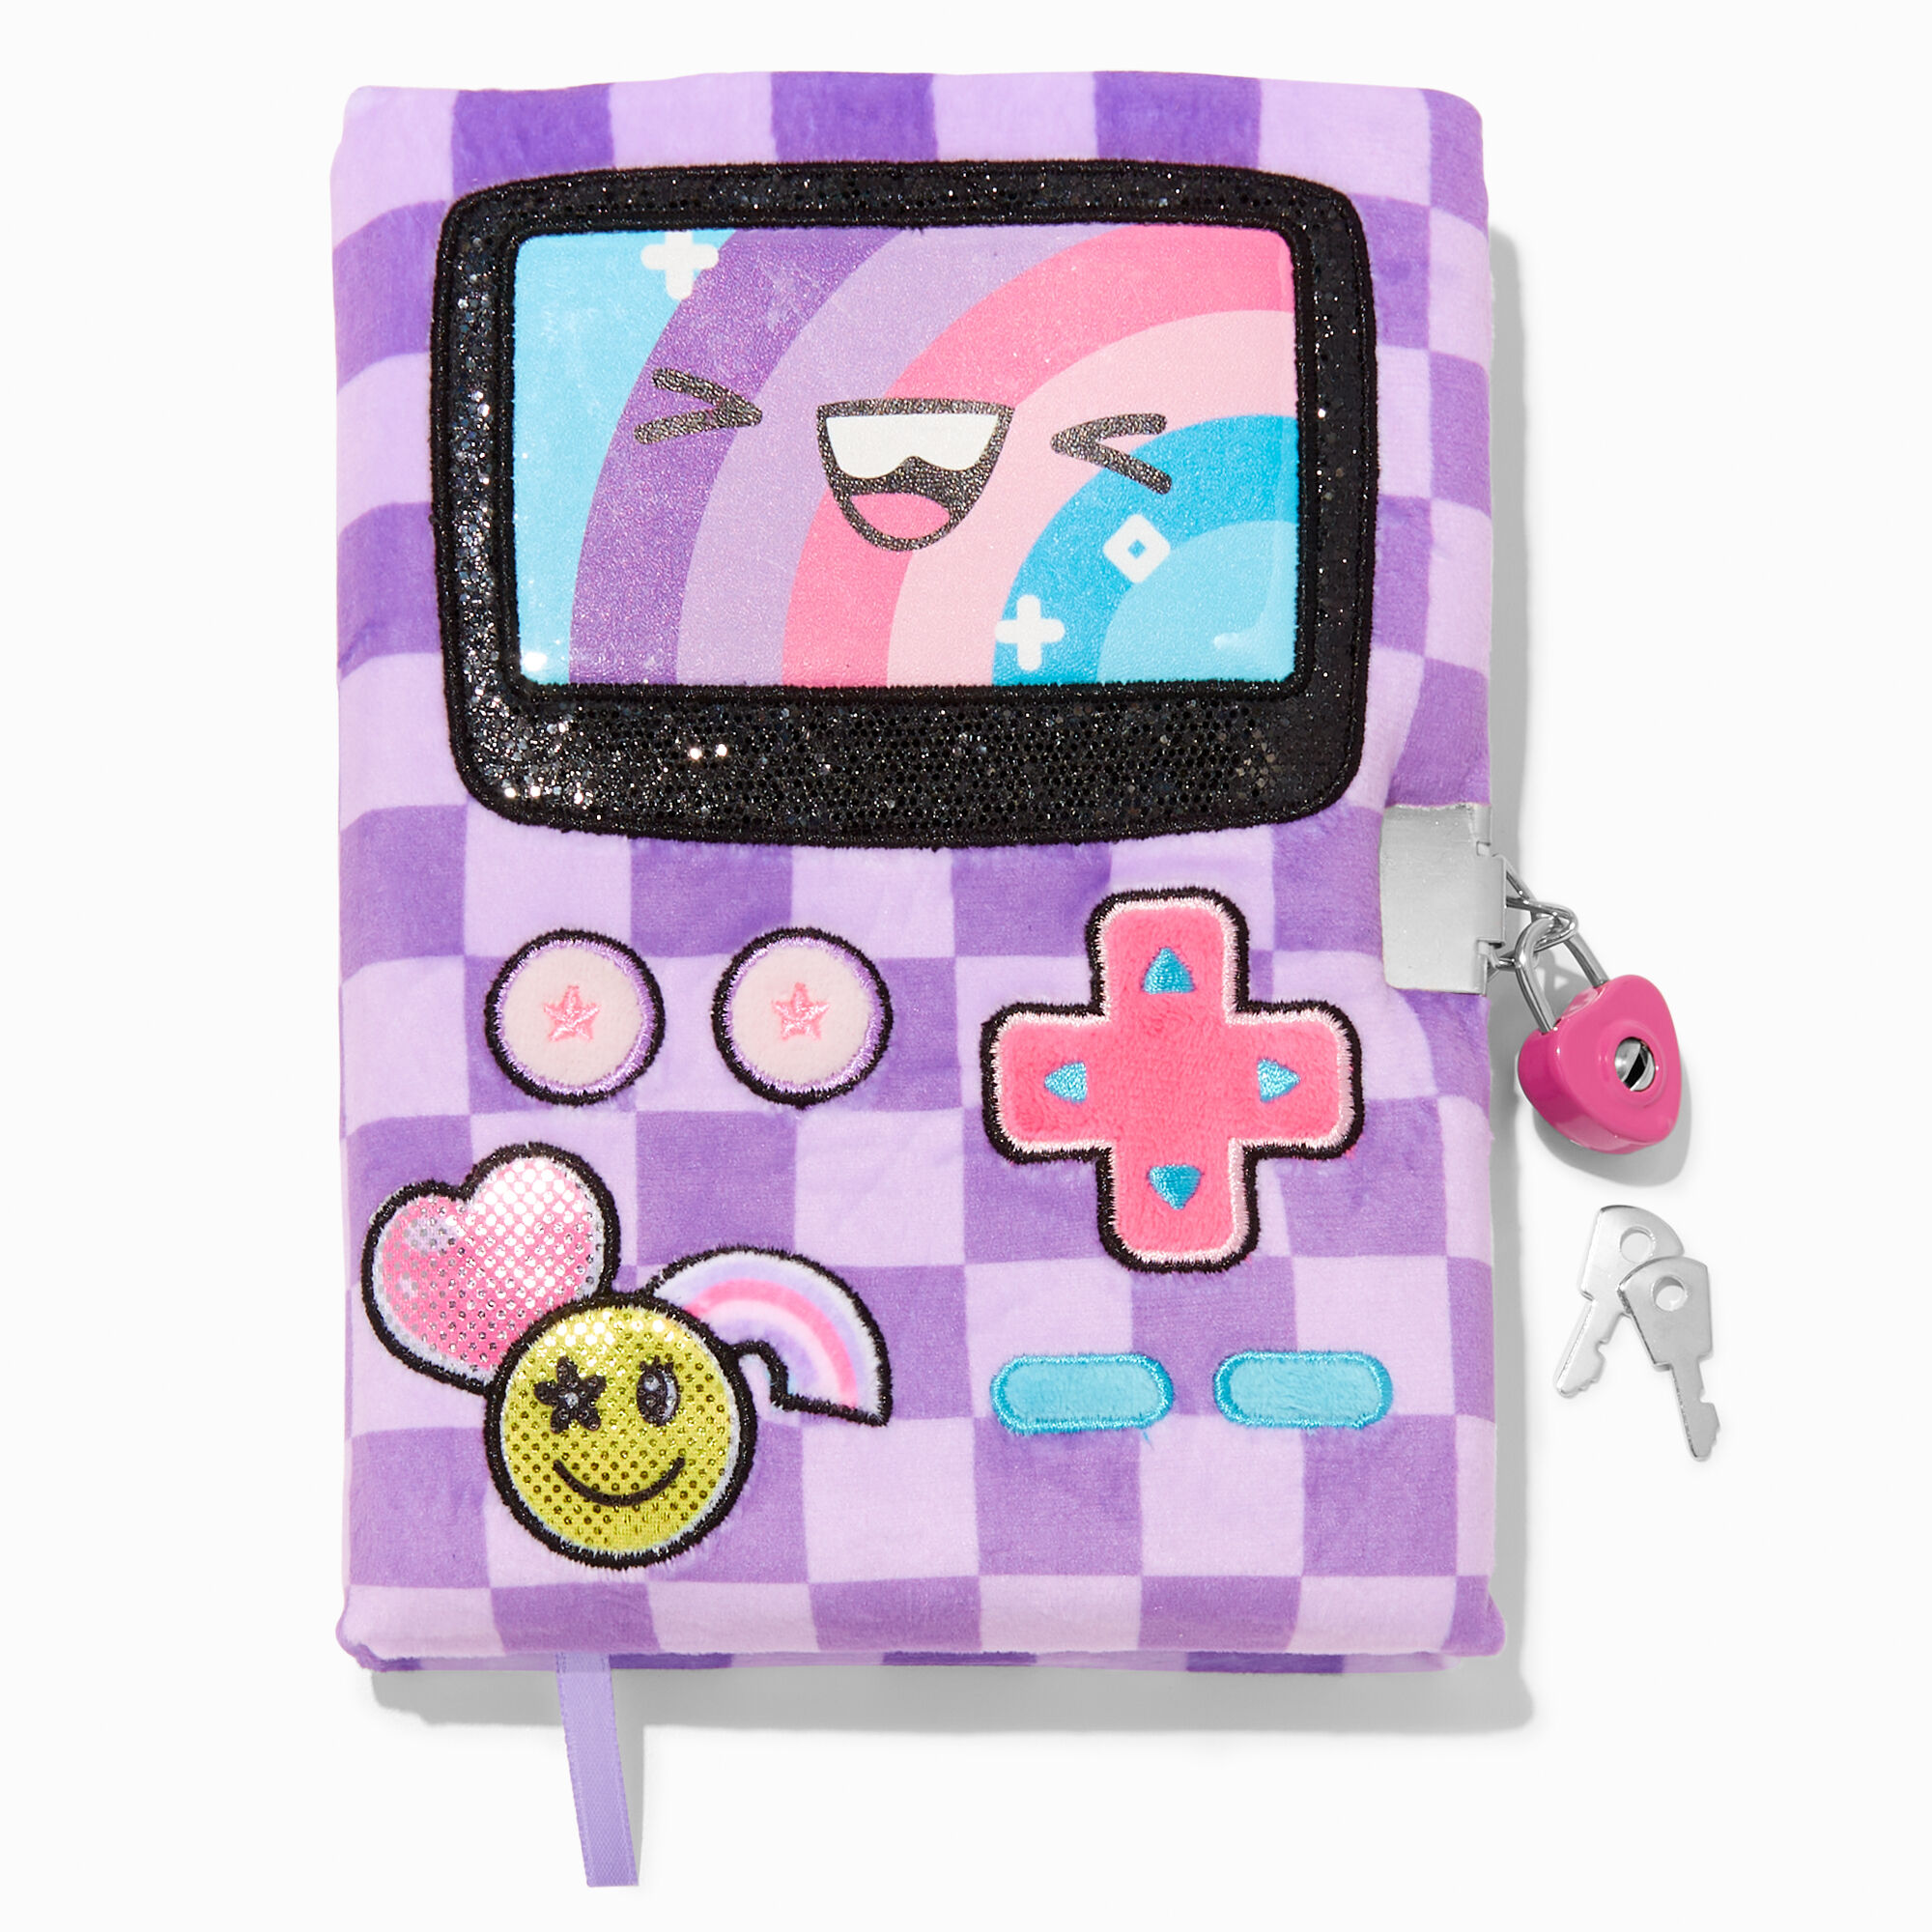 View Claires Gamer Girl Lock Diary information